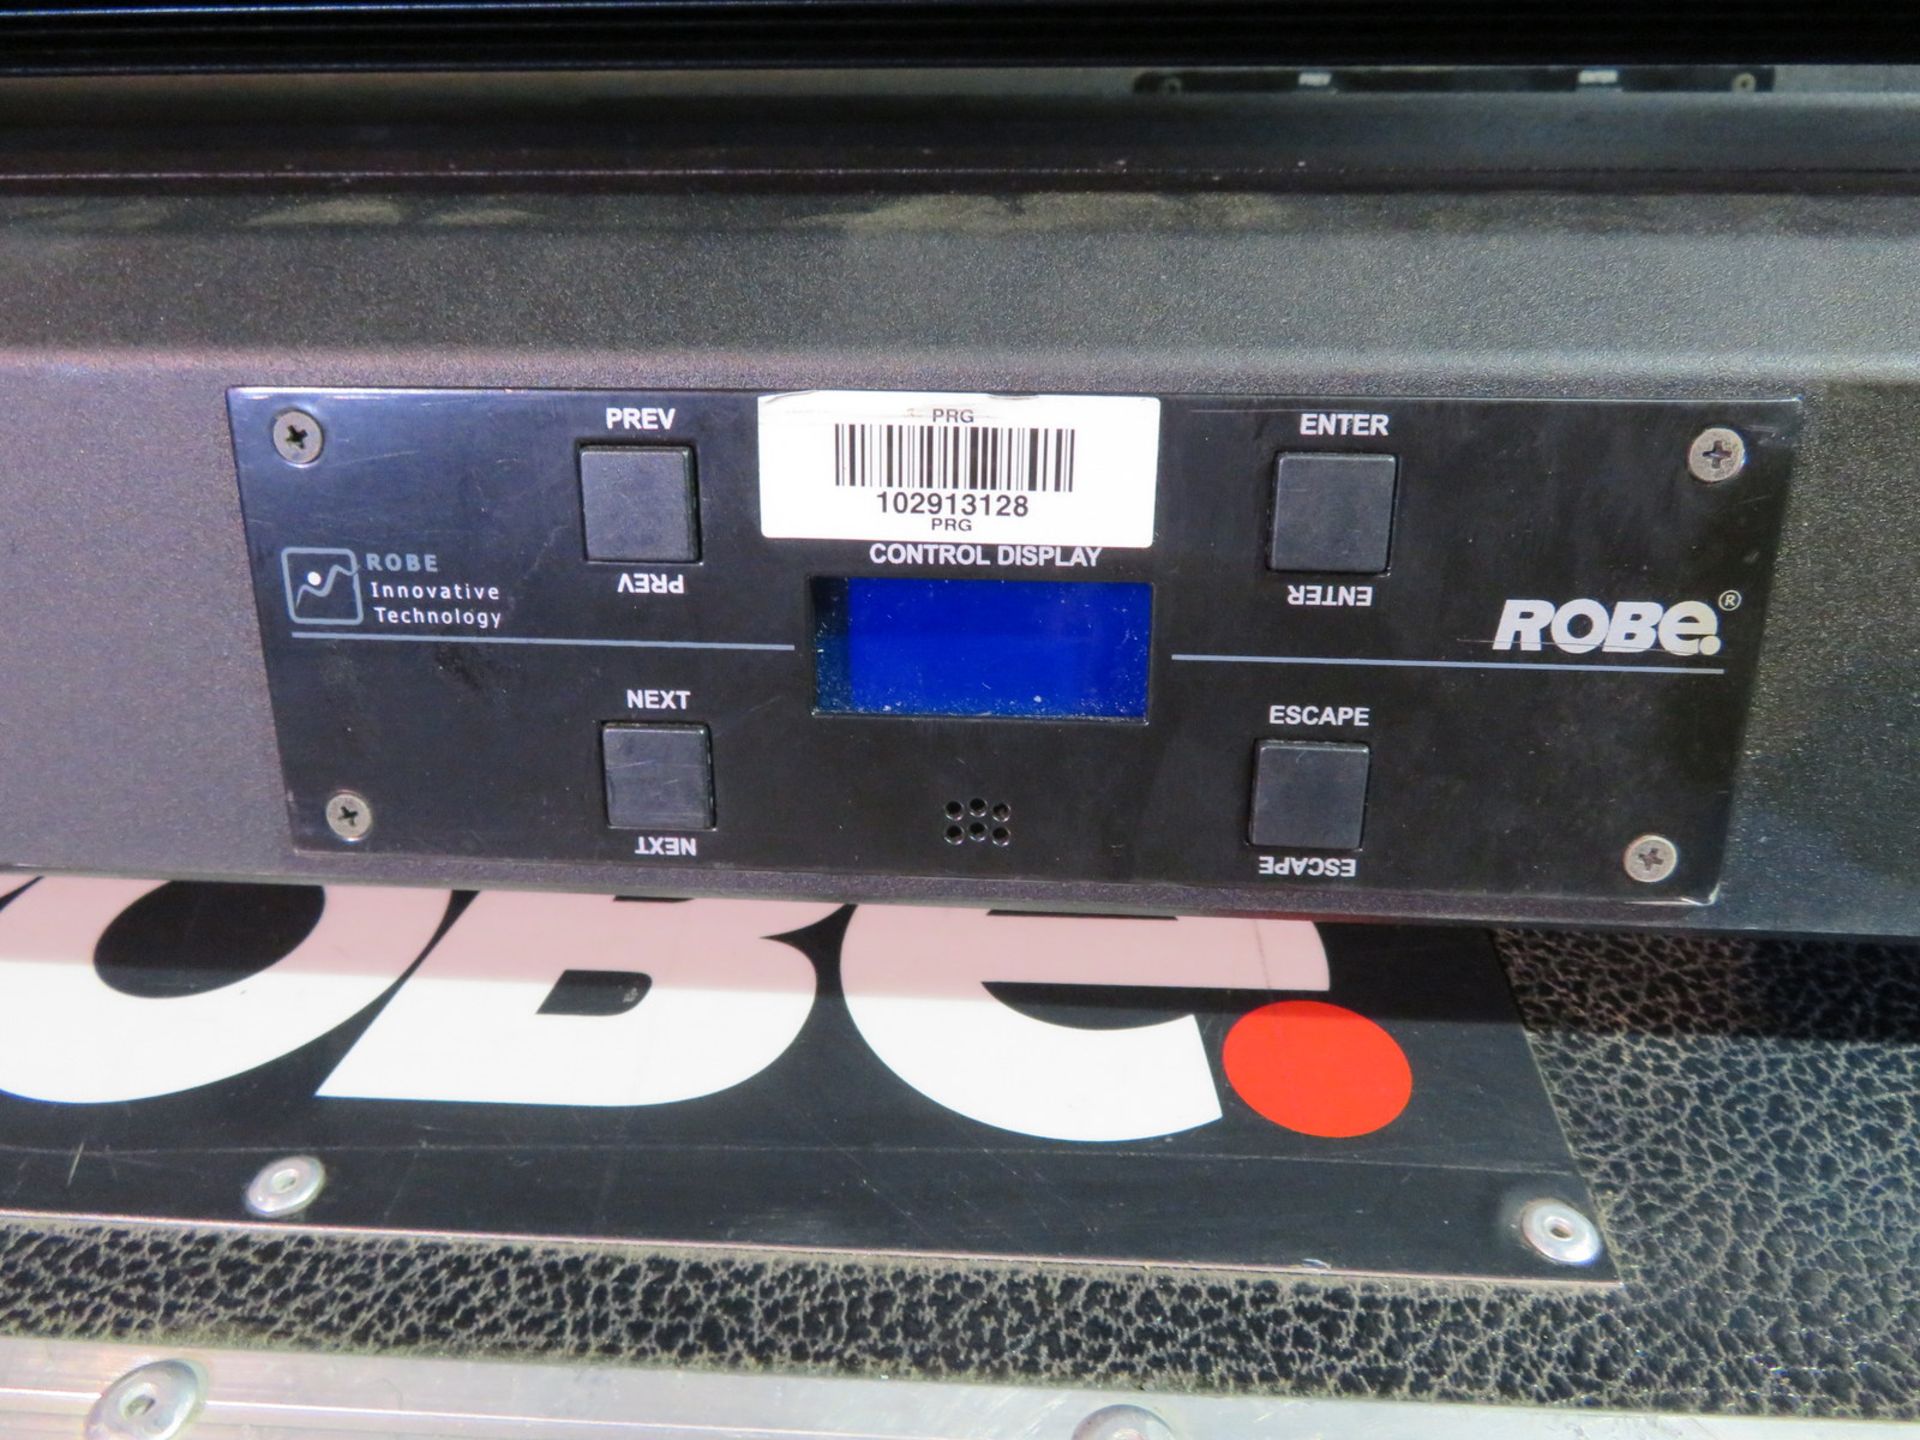 Pair of Robe CycFX8 in twin flightcase - Power hours: 9984 & 9848 - working - Image 5 of 9